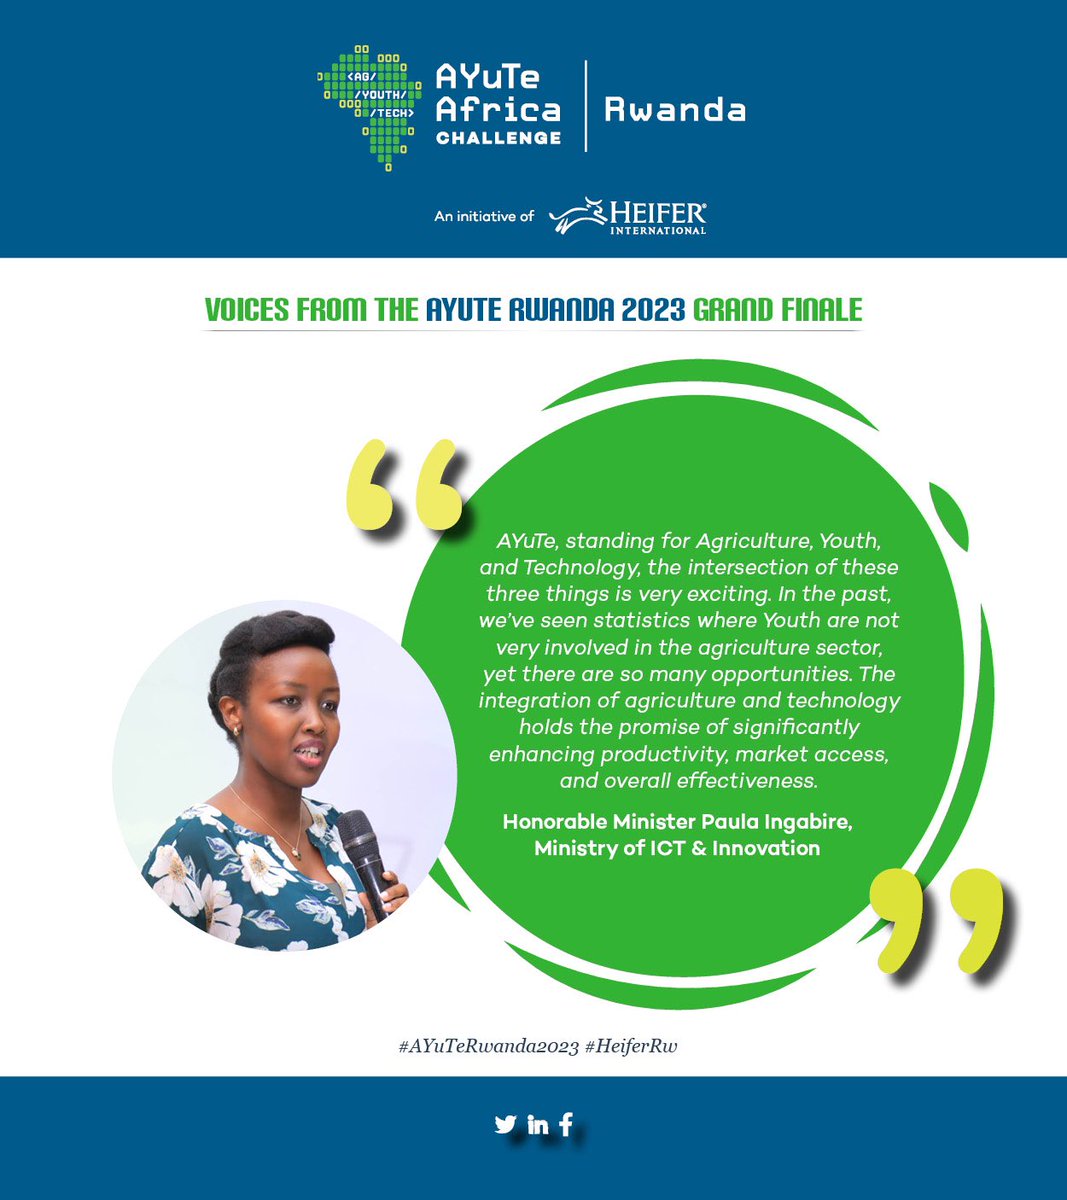 Voices from the #AYuTeRwanda2023 Grand Finale. Honorable Minister @MusoniPaula on the Exciting Potential of @AyuteAfrica - Agriculture, Youth, and Technology - in Rwanda's Agri-Tech Landscape. #RwandaInnovates #Rwanda